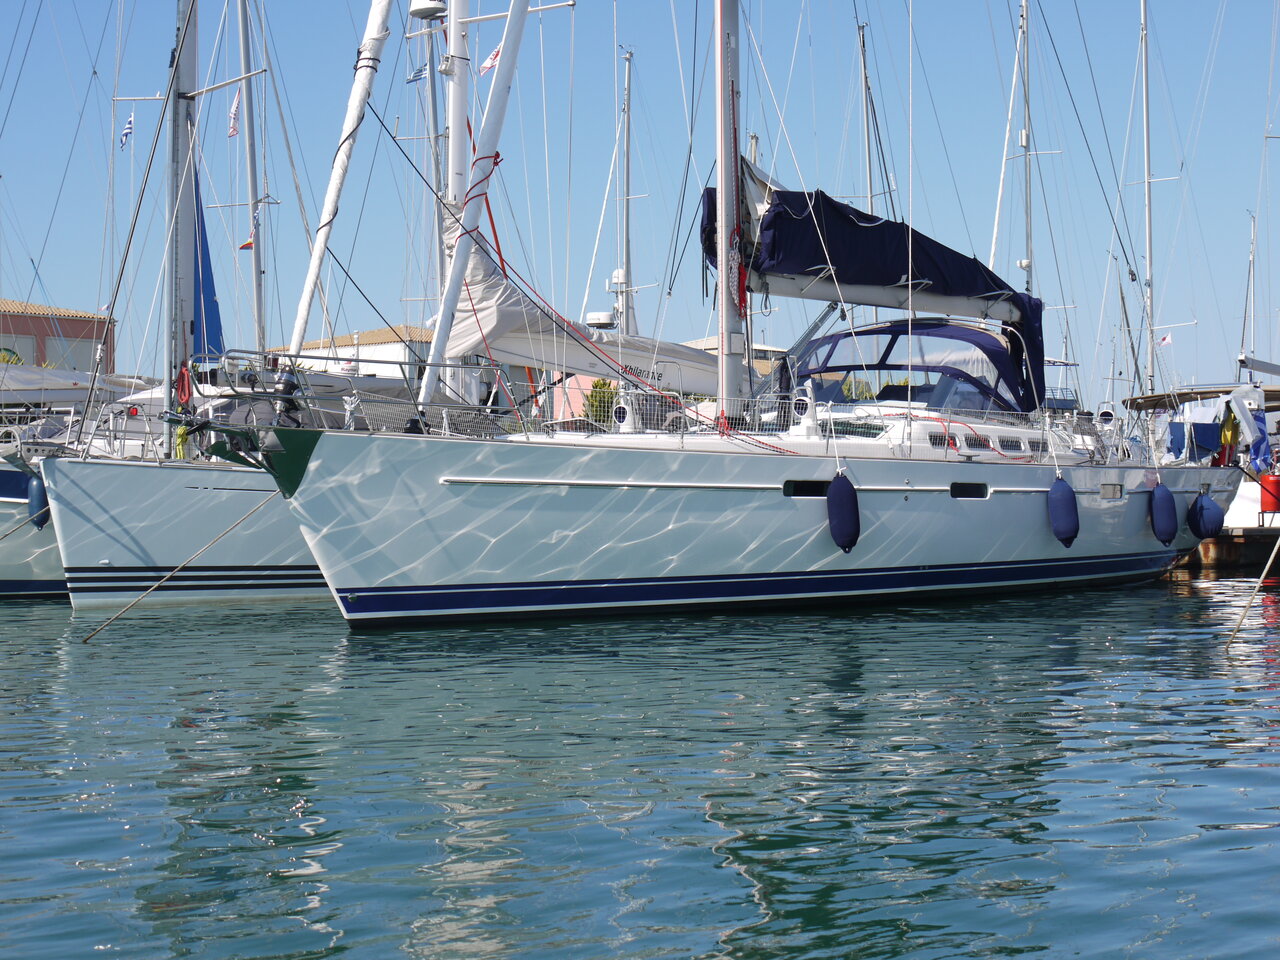 Beneteau 57 - 4 cab. - Yours Truly